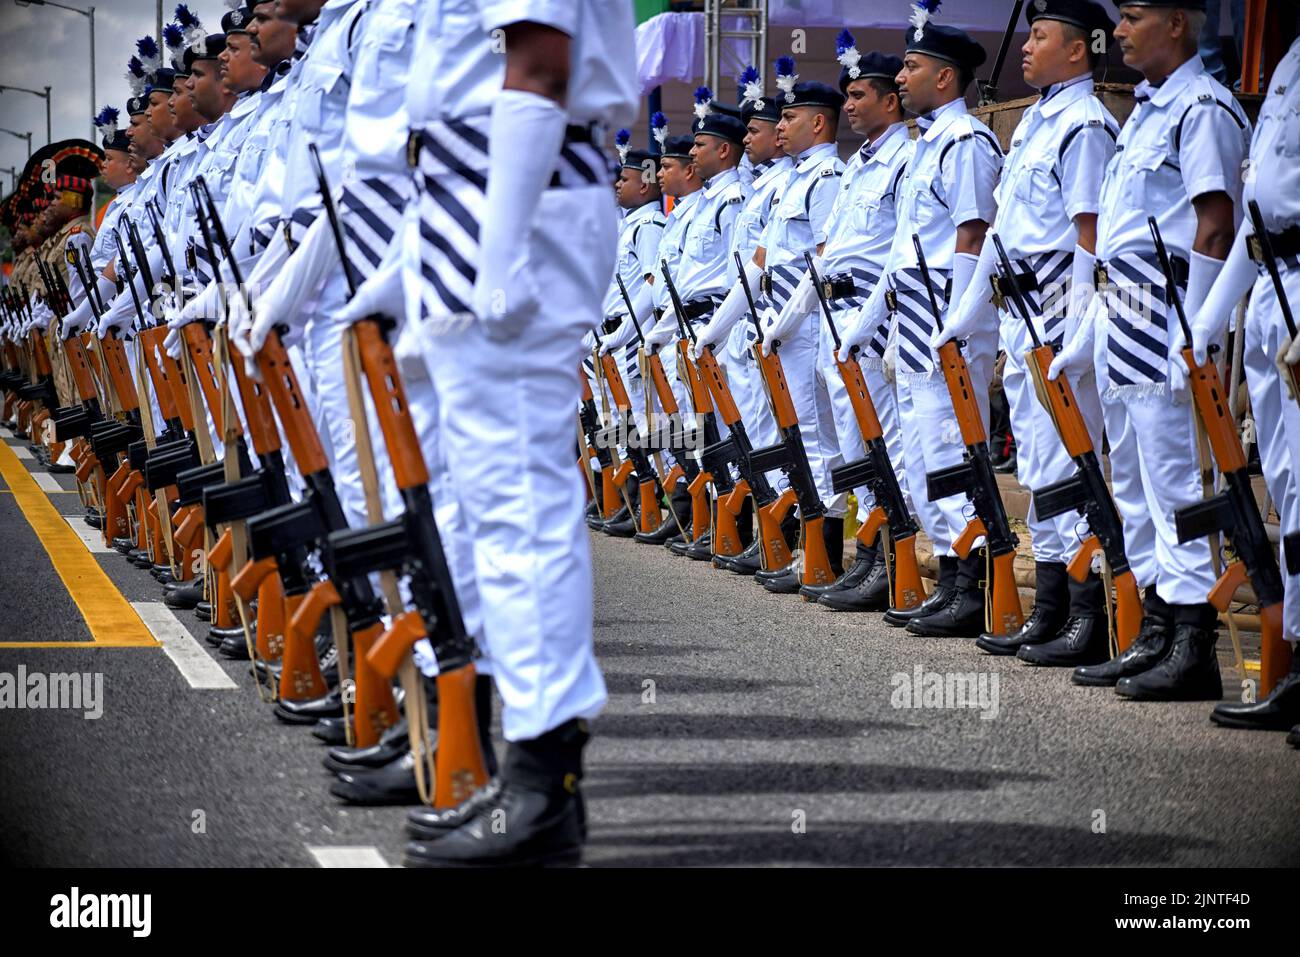 Kolkata Police Armed Police men's Team seen practicing during the Independence day Final Dress Rehearsal. India prepares to celebrate the 75th Independence day on 15th August 2022 as part of the Azadi Ka Amrit Mahotsav celebration. Stock Photo